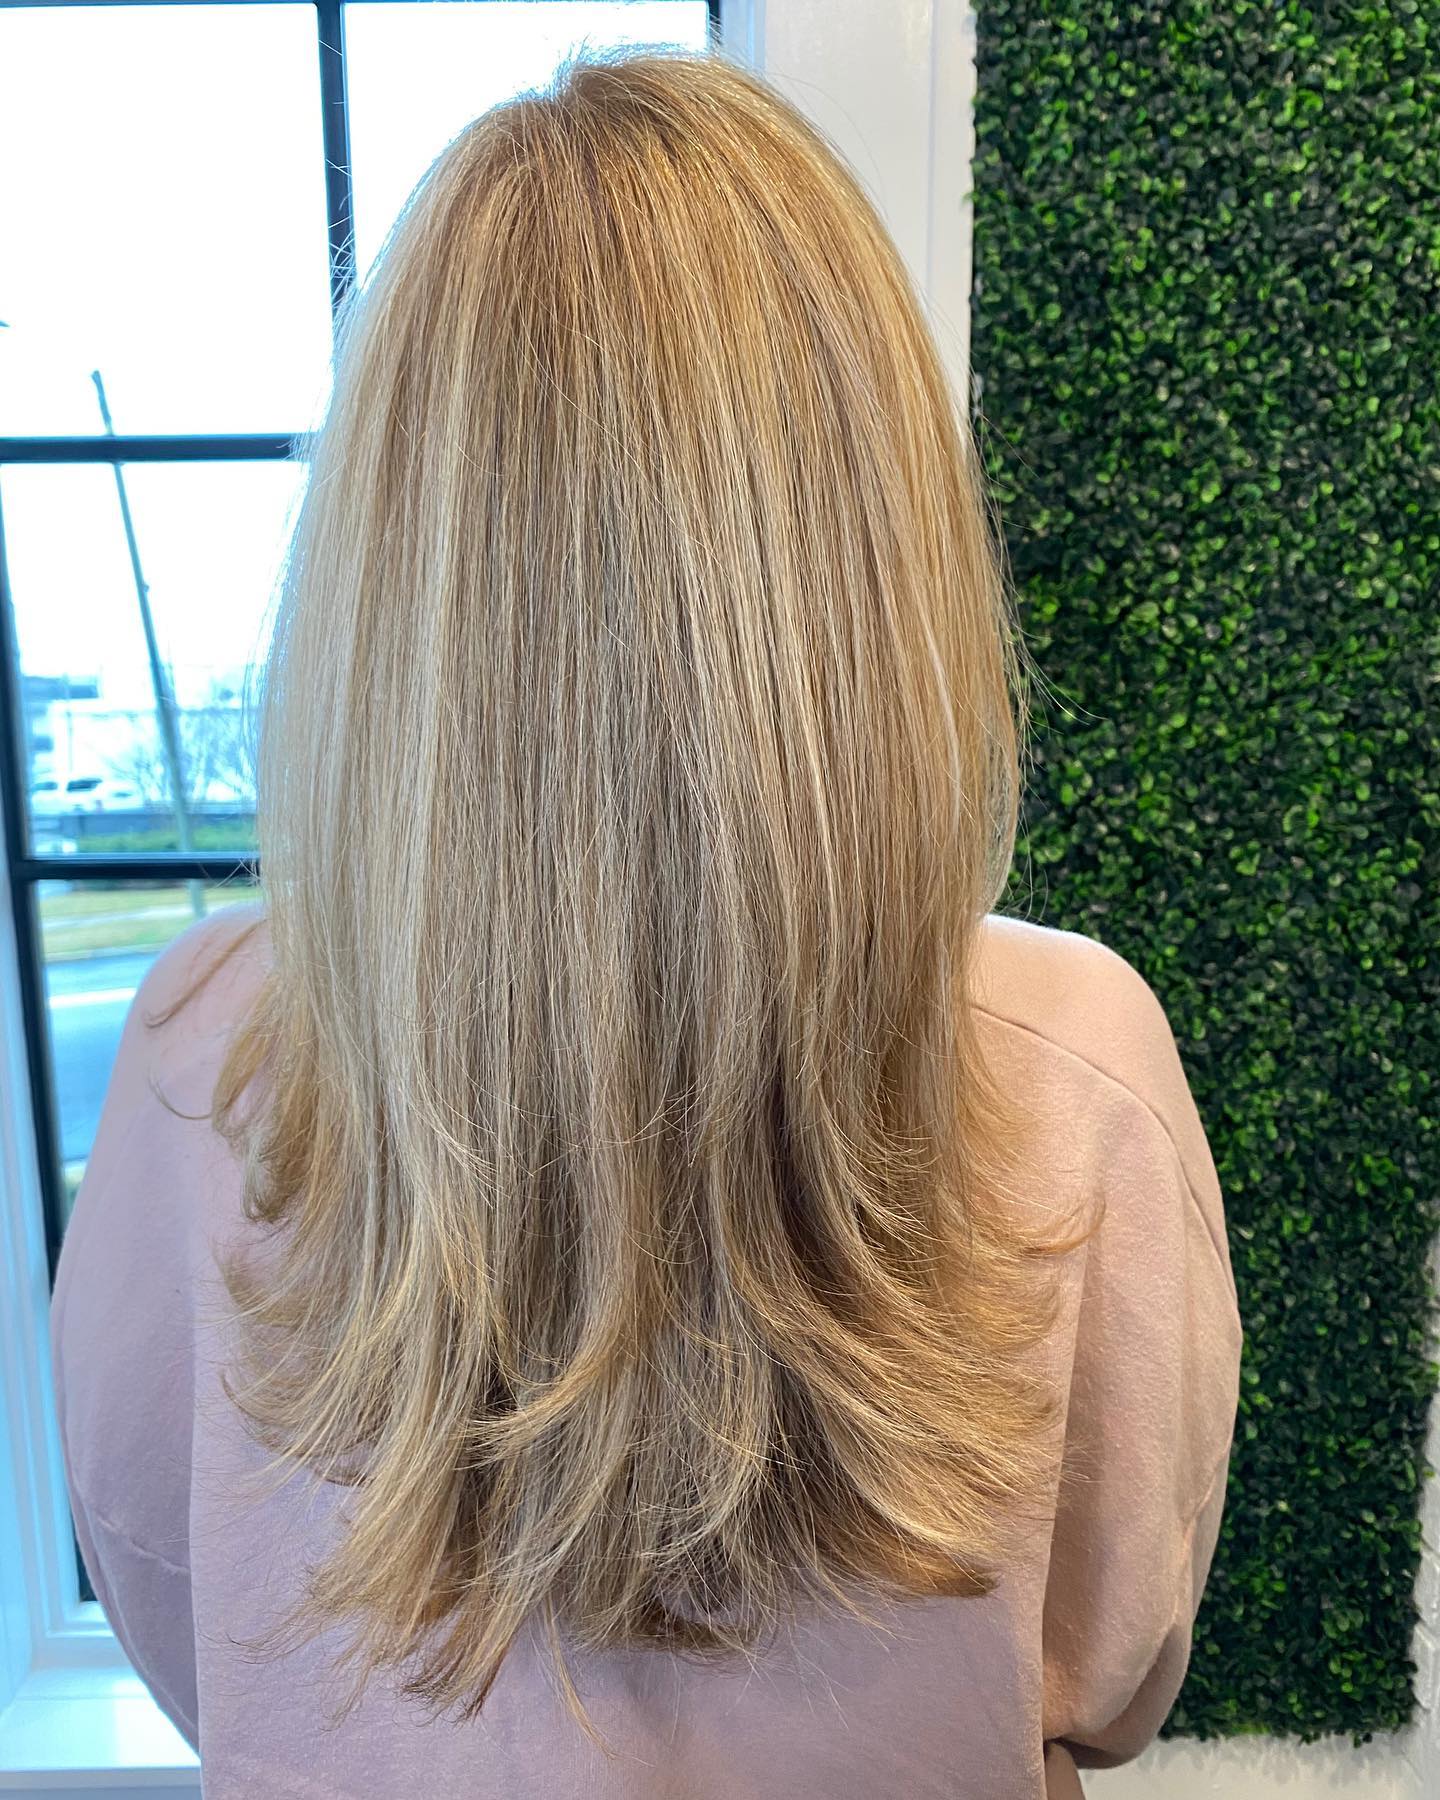 A cascade of blonde beauty. 😍 Cut and color by Scott. #hairfolk